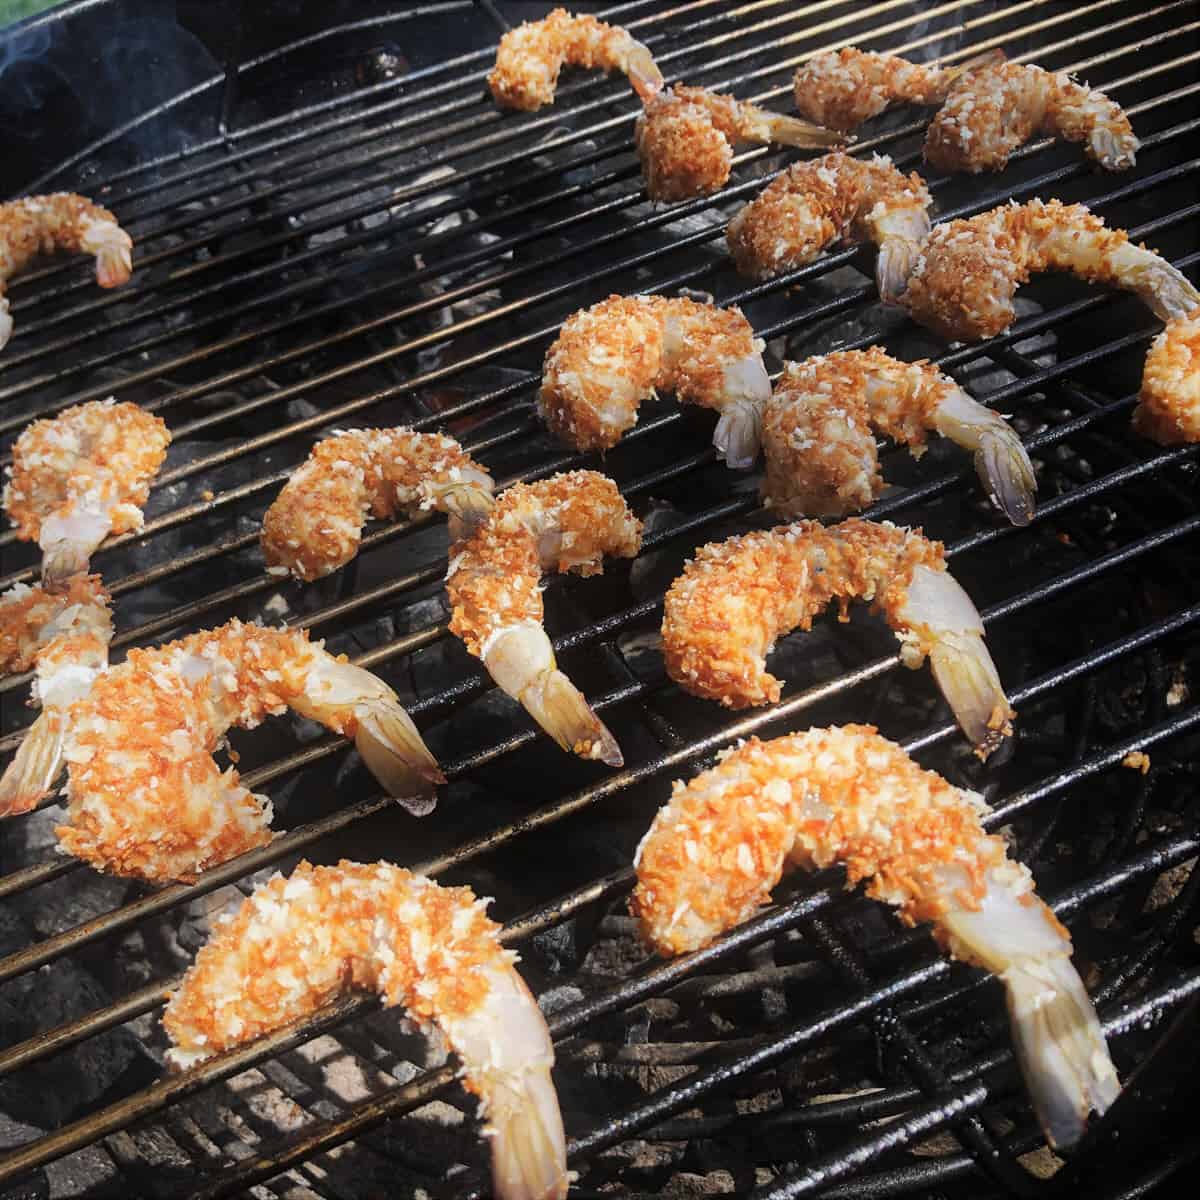 HOW TO GRILL COCONUT SHRIMP: